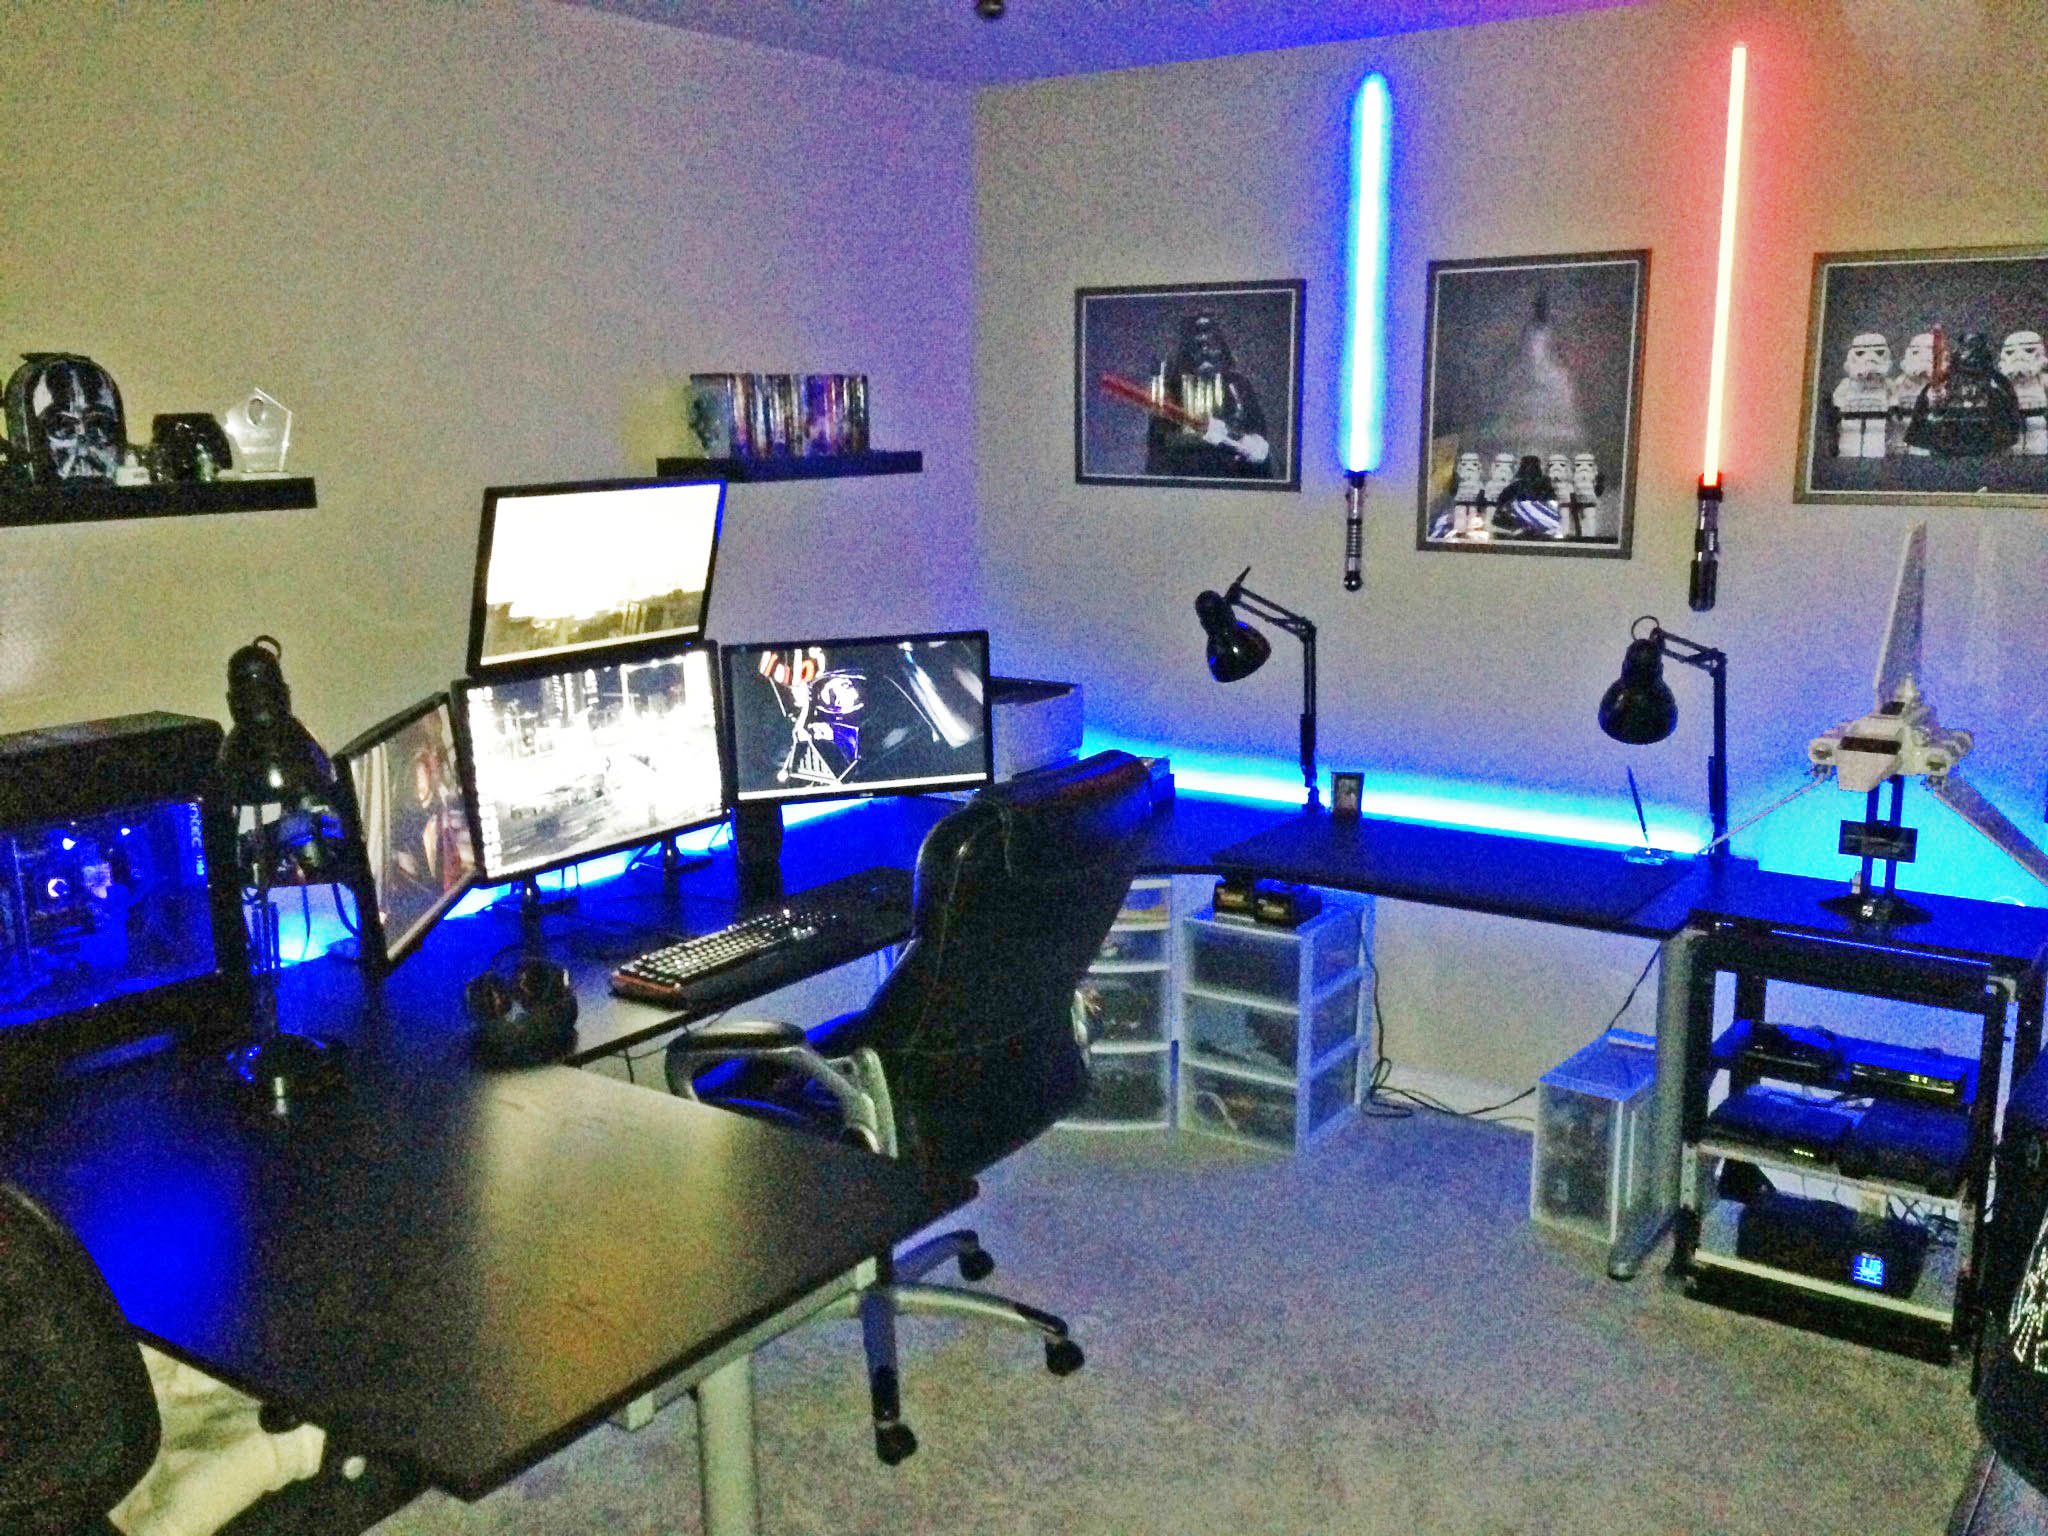 If you don't have a game room set up with light sabers and LED lights, then you haven't learned how to game the right way.